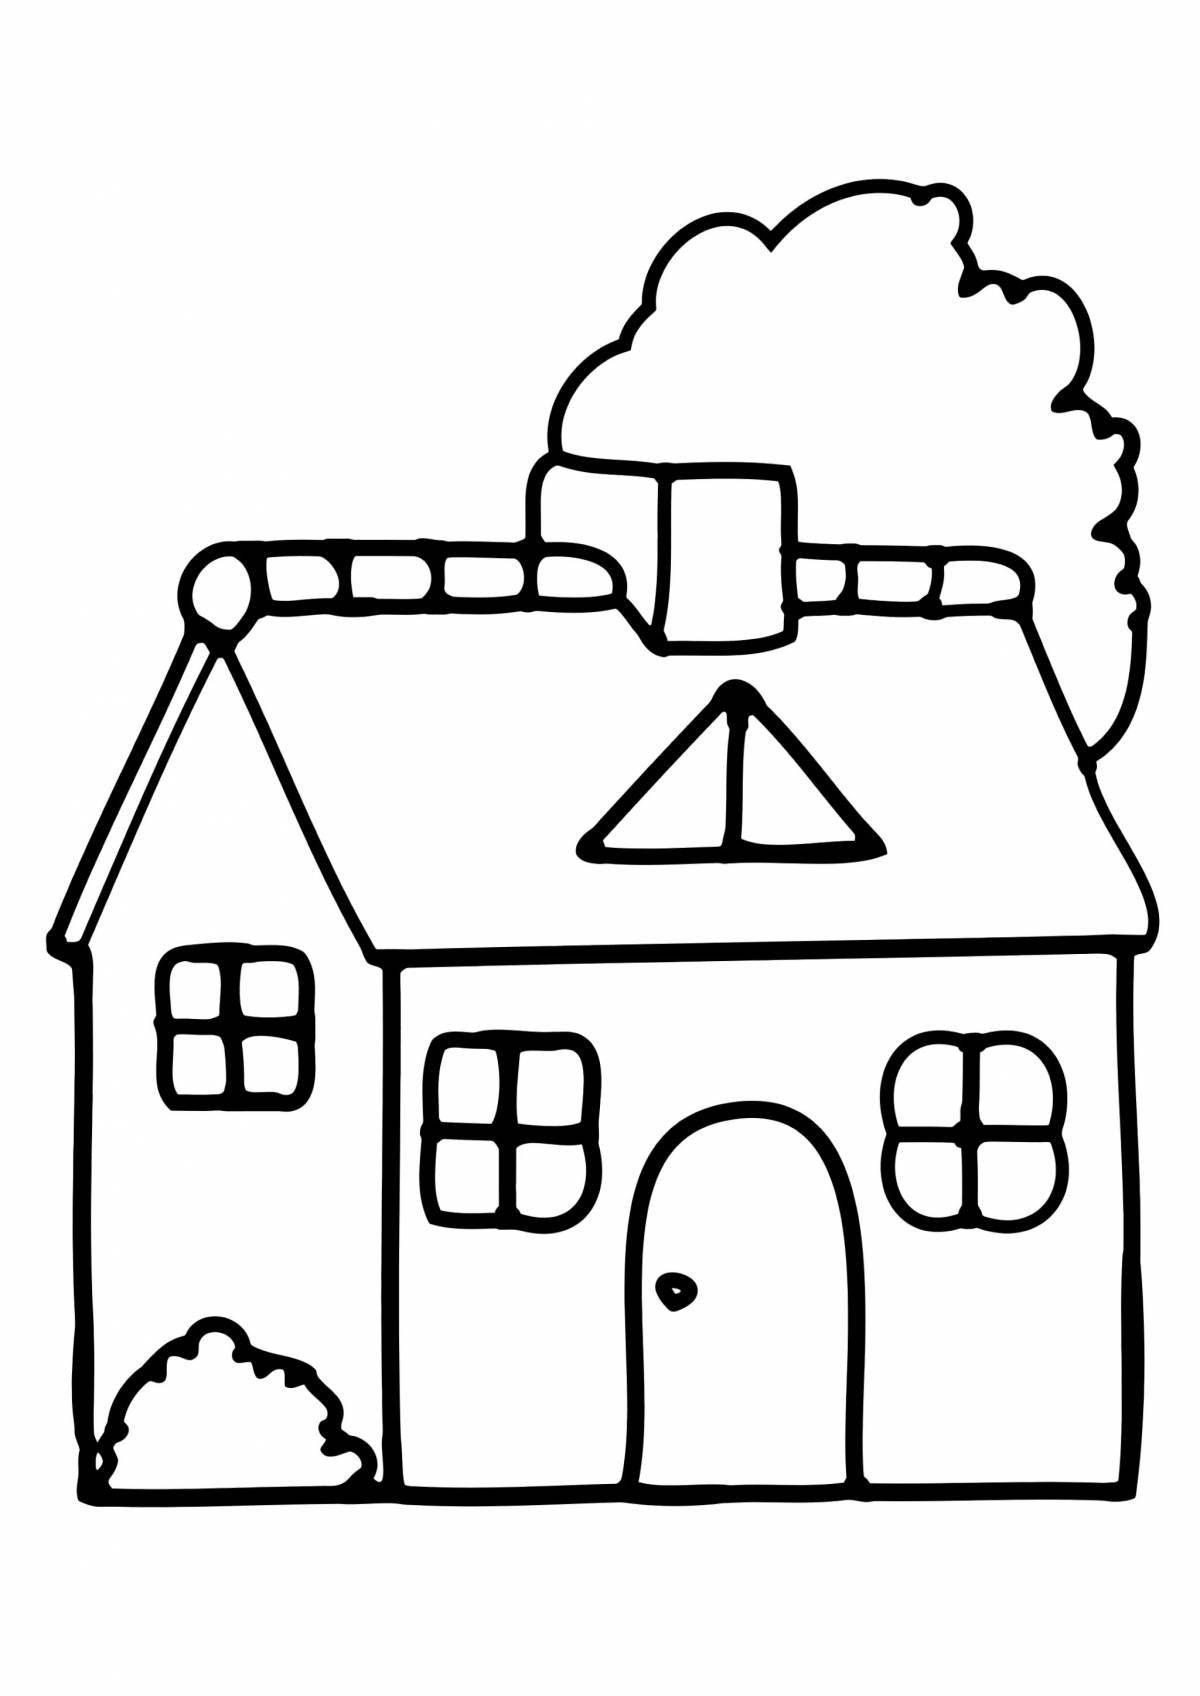 Wonderful house coloring for kids